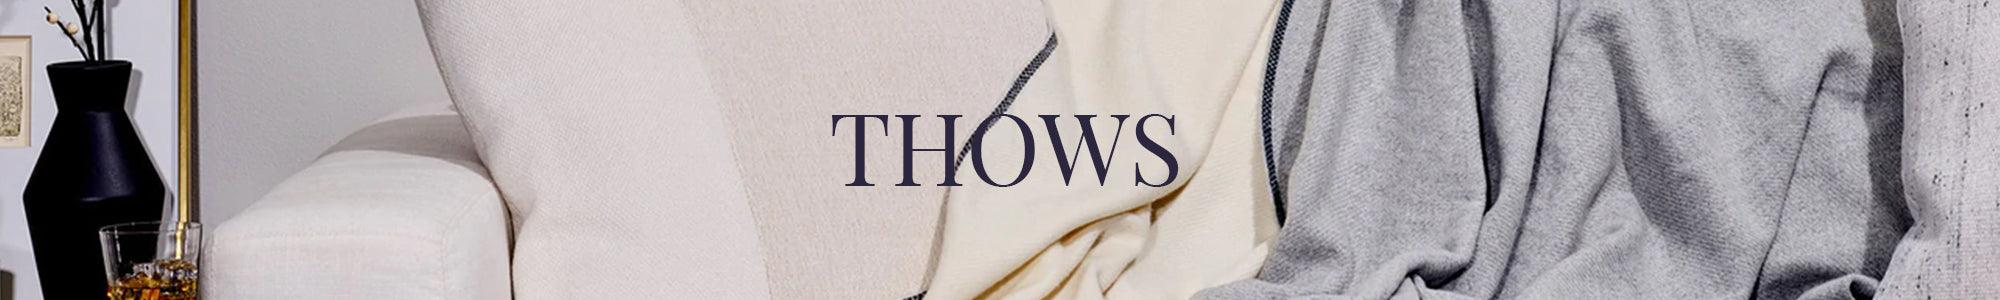 Throws - House Journey